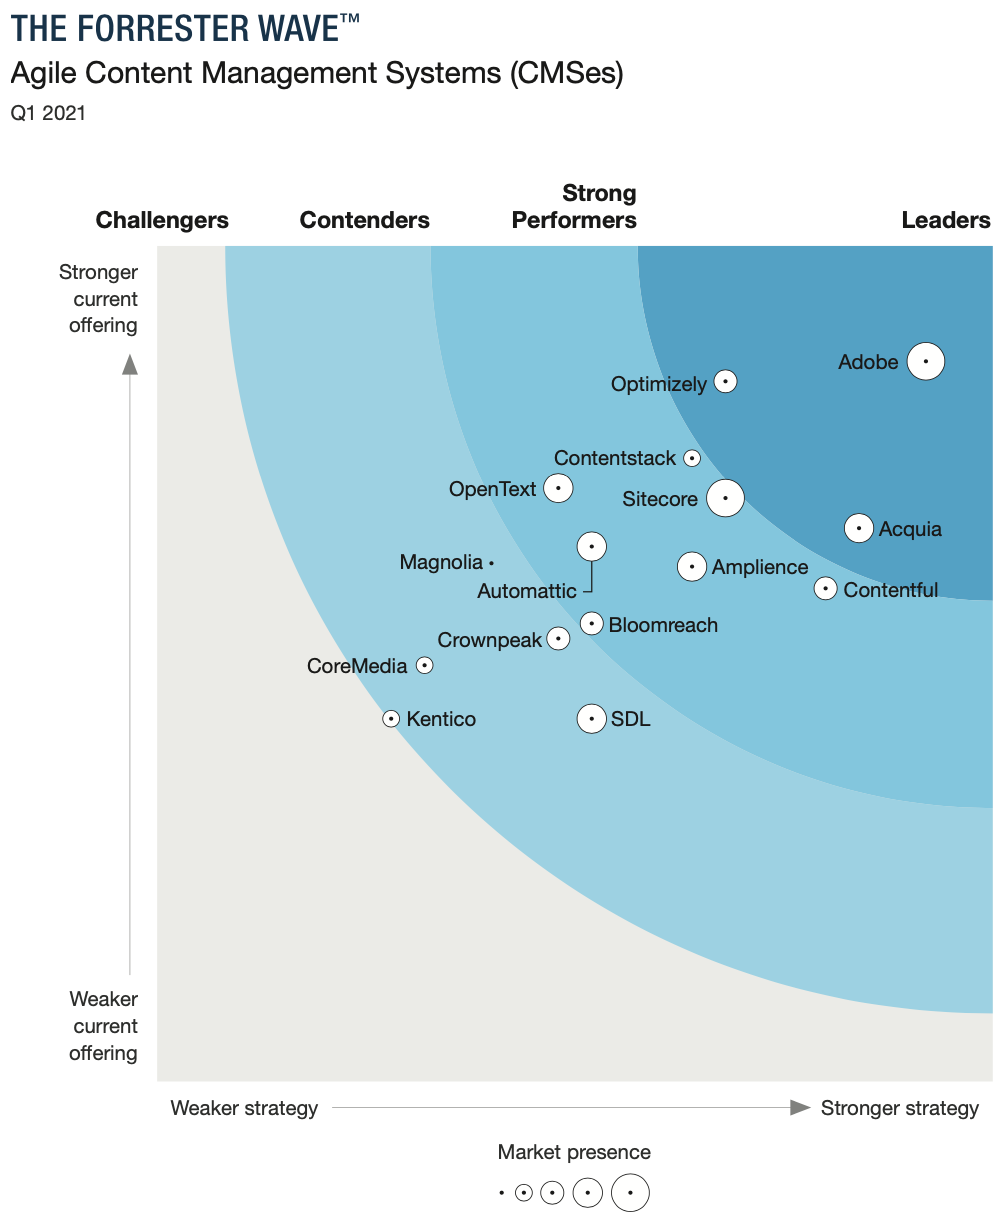 Acquia A Leader In The 2021 Forrester Wave For Agile Content Management Systems Dries Buytaert